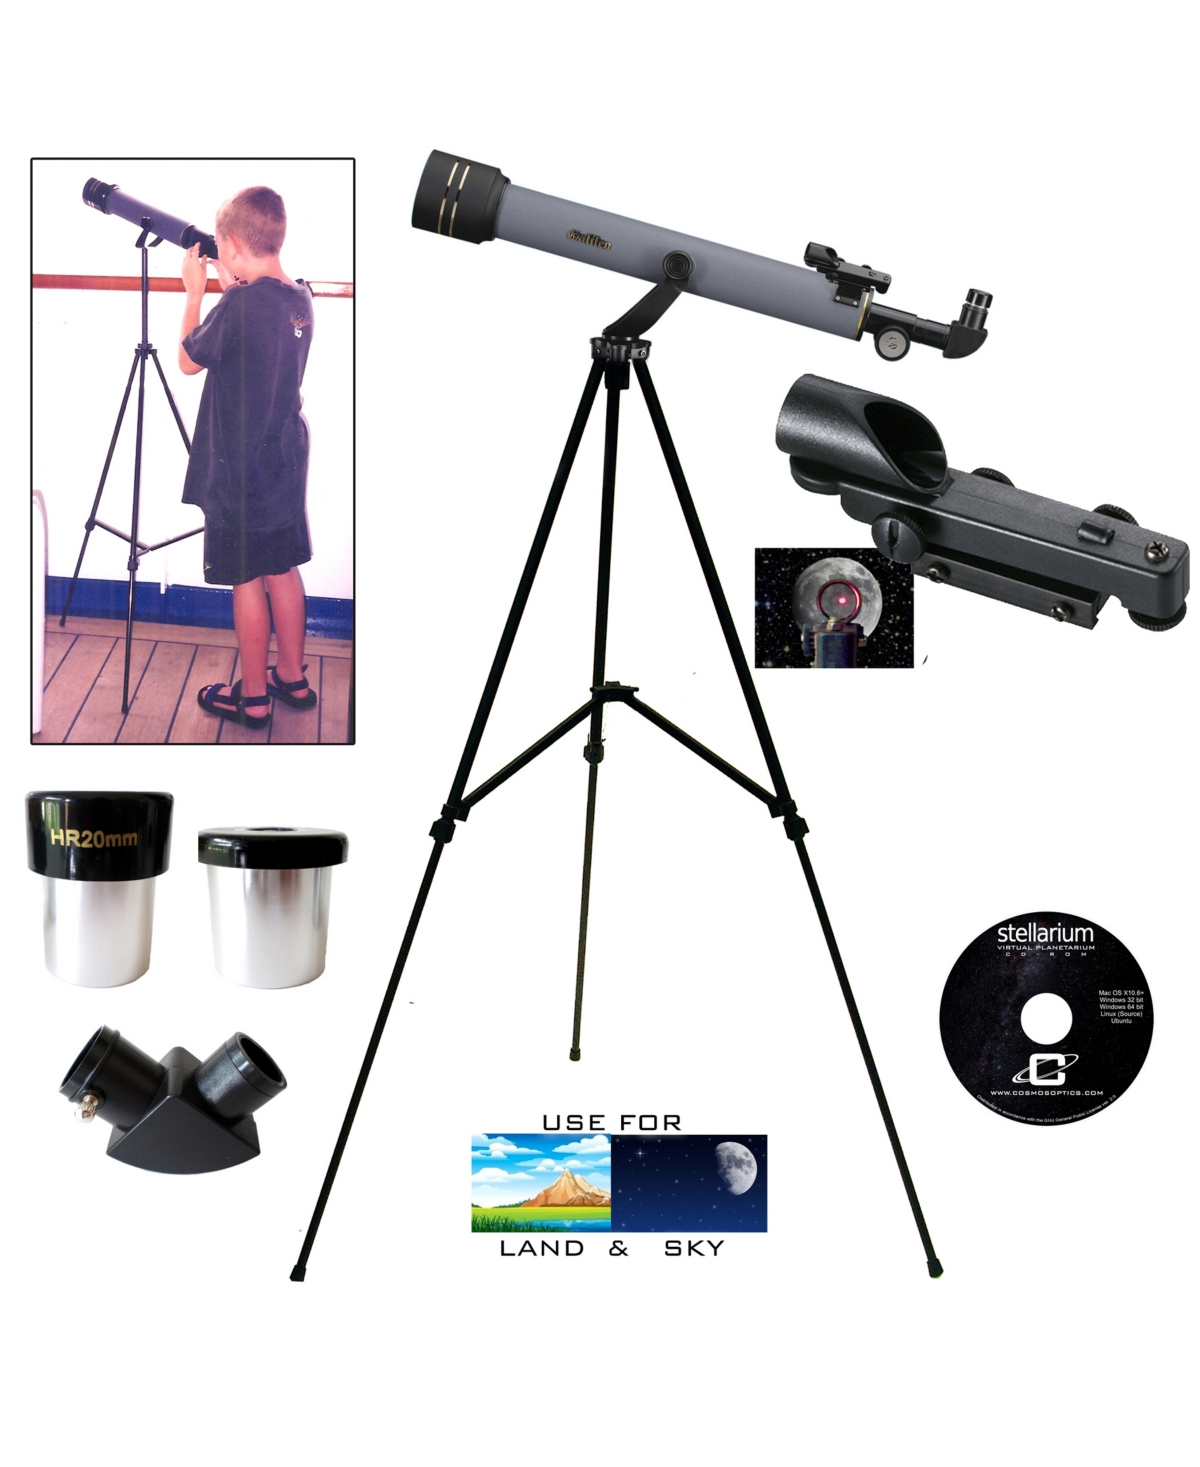 Cosmo Brands Galileo 600 X 50 Starter Telescope With Red Dot Finderscope And Stellarium Cd In Gray